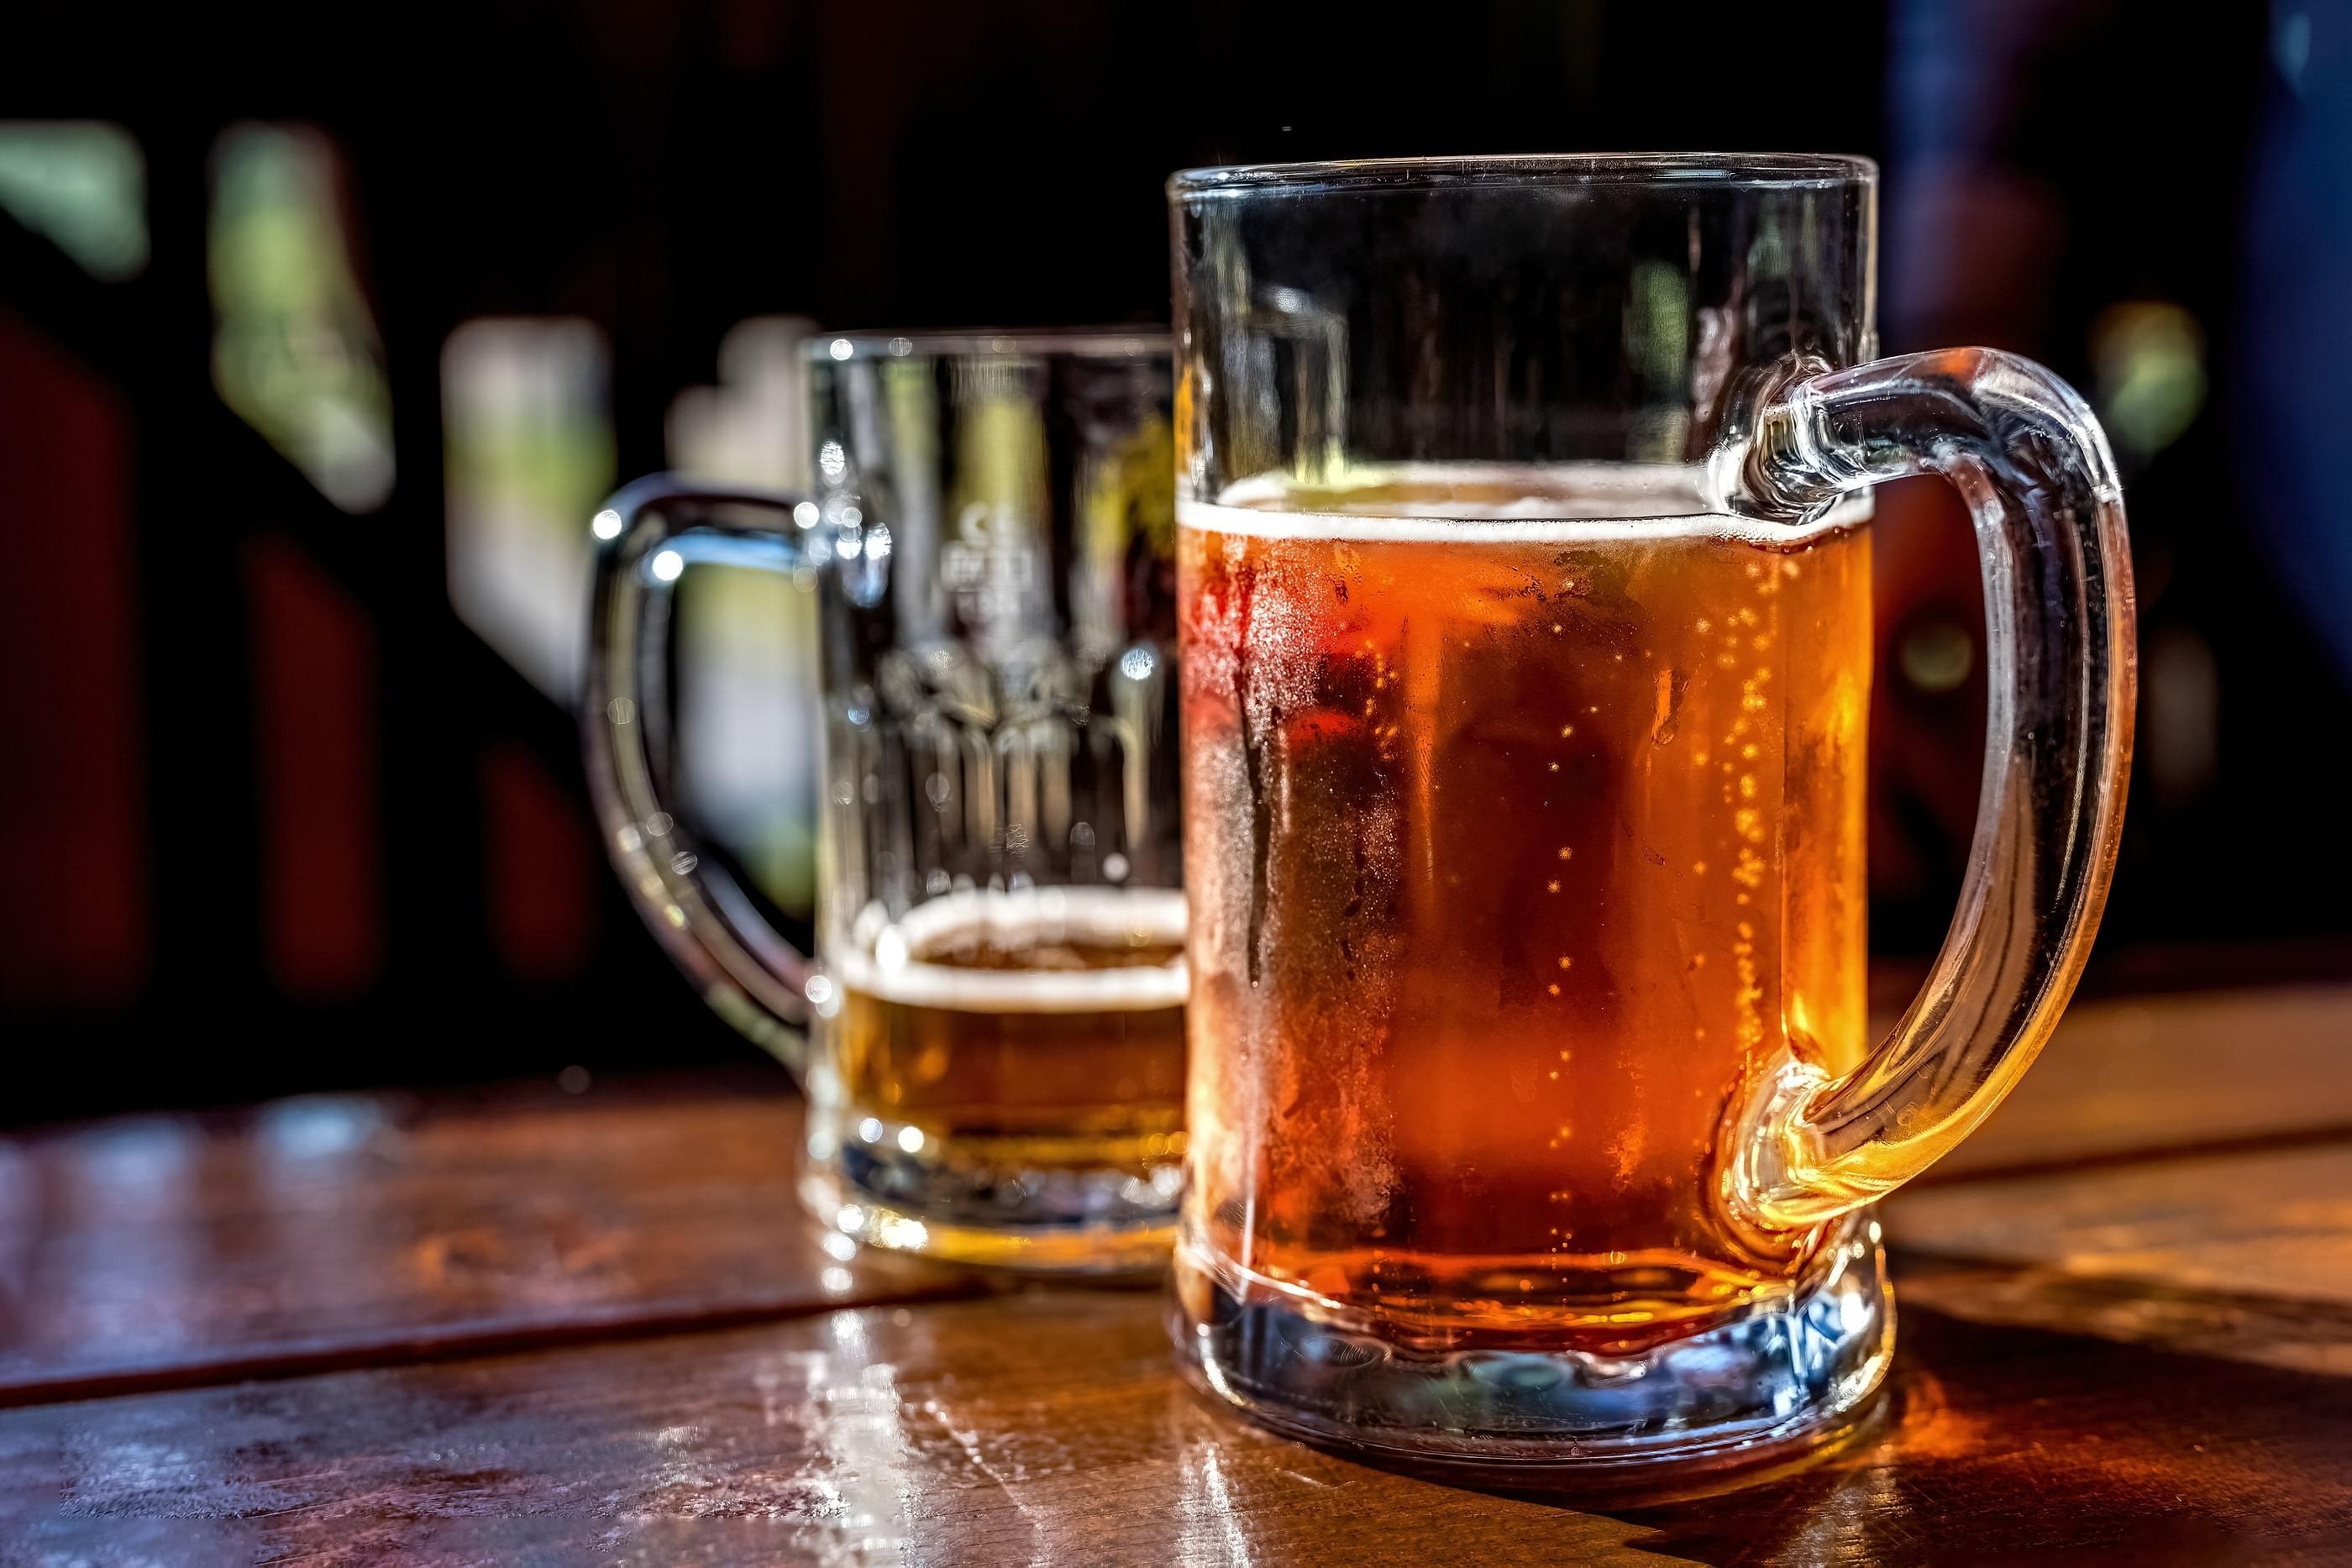 Two glass beer mugs on a wooden table